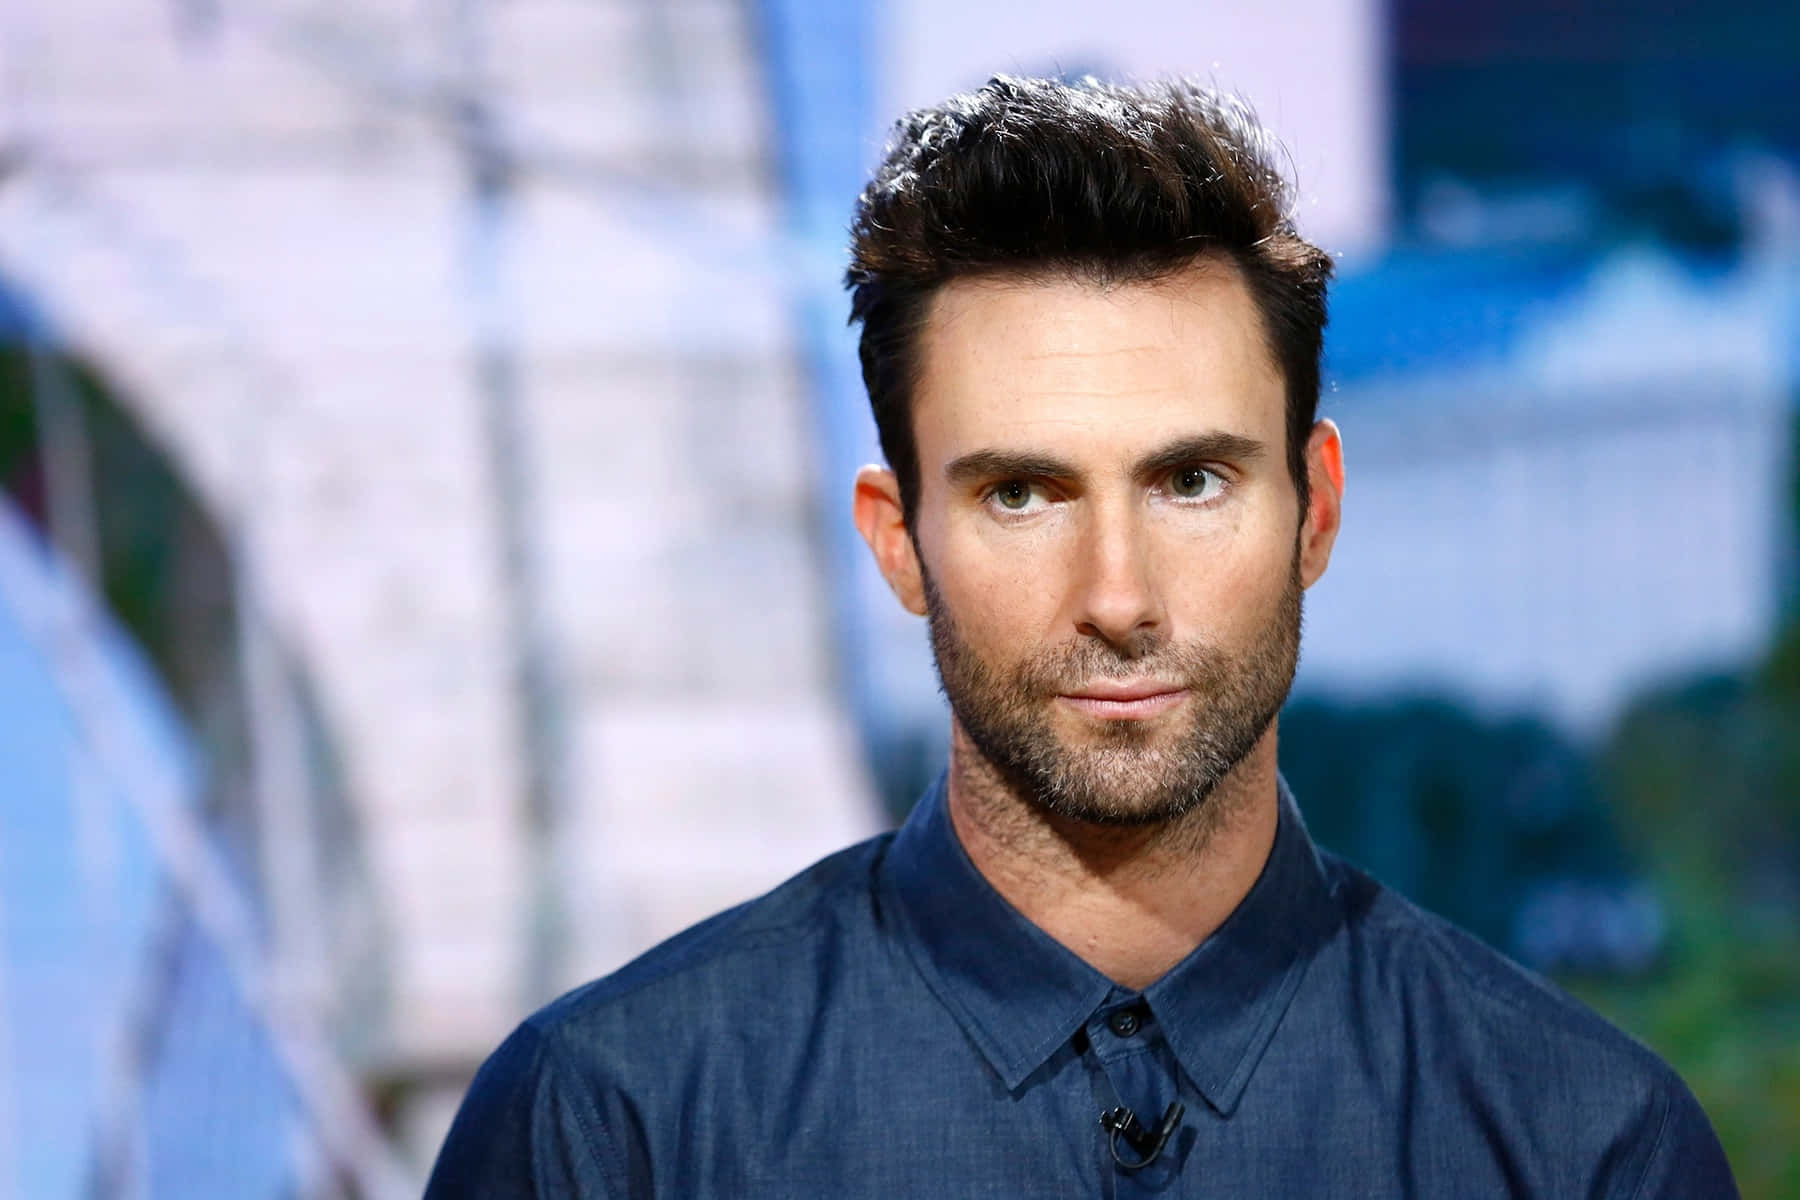 Adam Levine gracing the stage with his charm